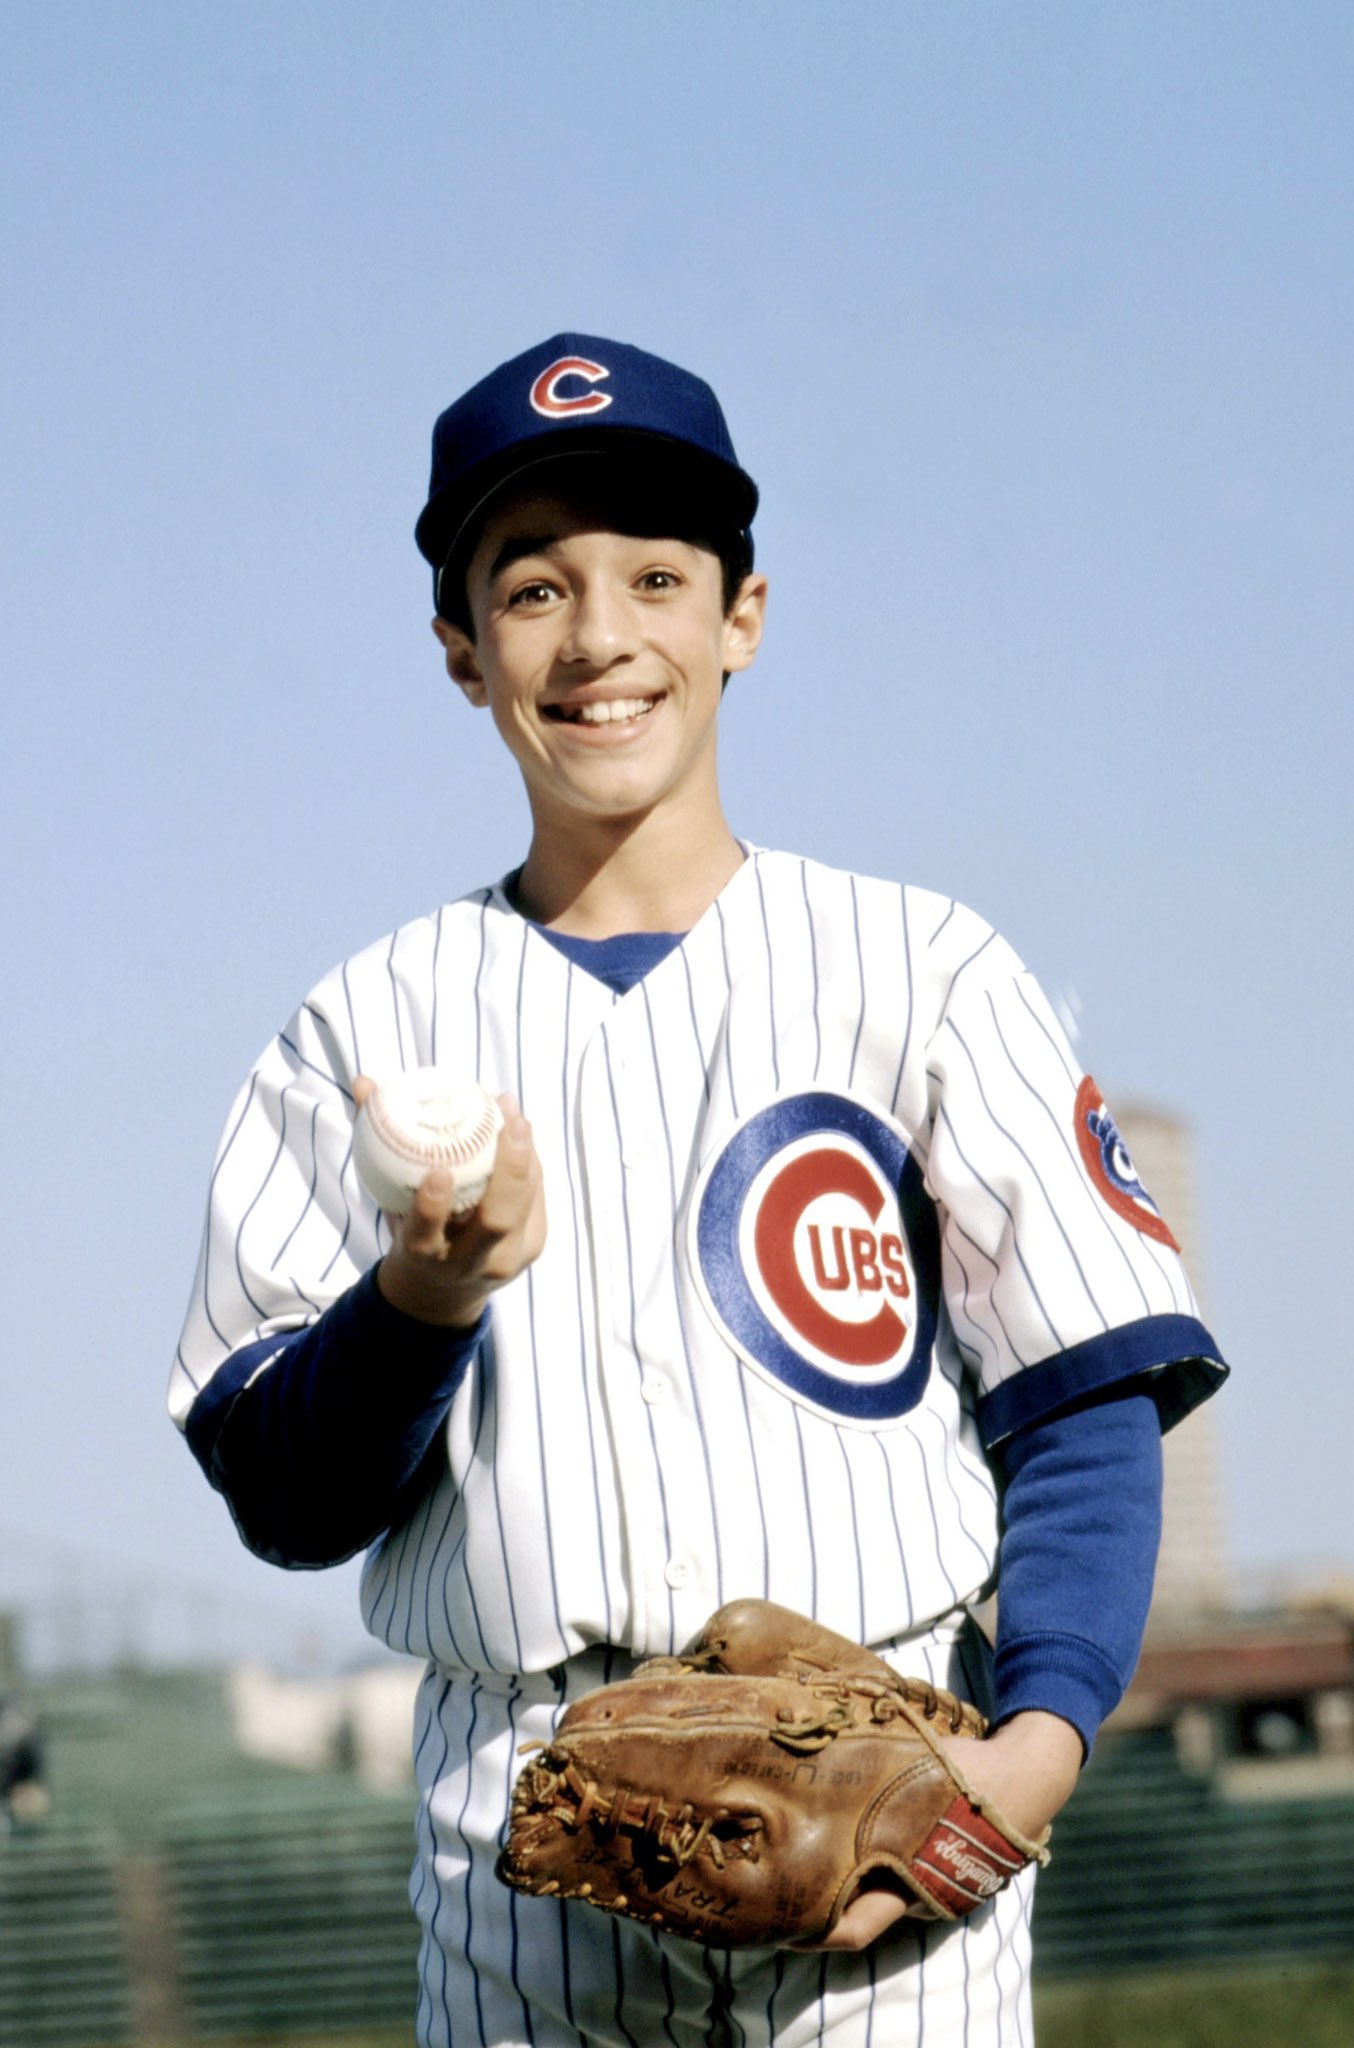 Henry Rowengartner, an actor from the film Rookie of the Year, prepares  to throw out a ceremonial first pitch before a baseball game between the  St. Louis Cardinals and the Chicago Cubs